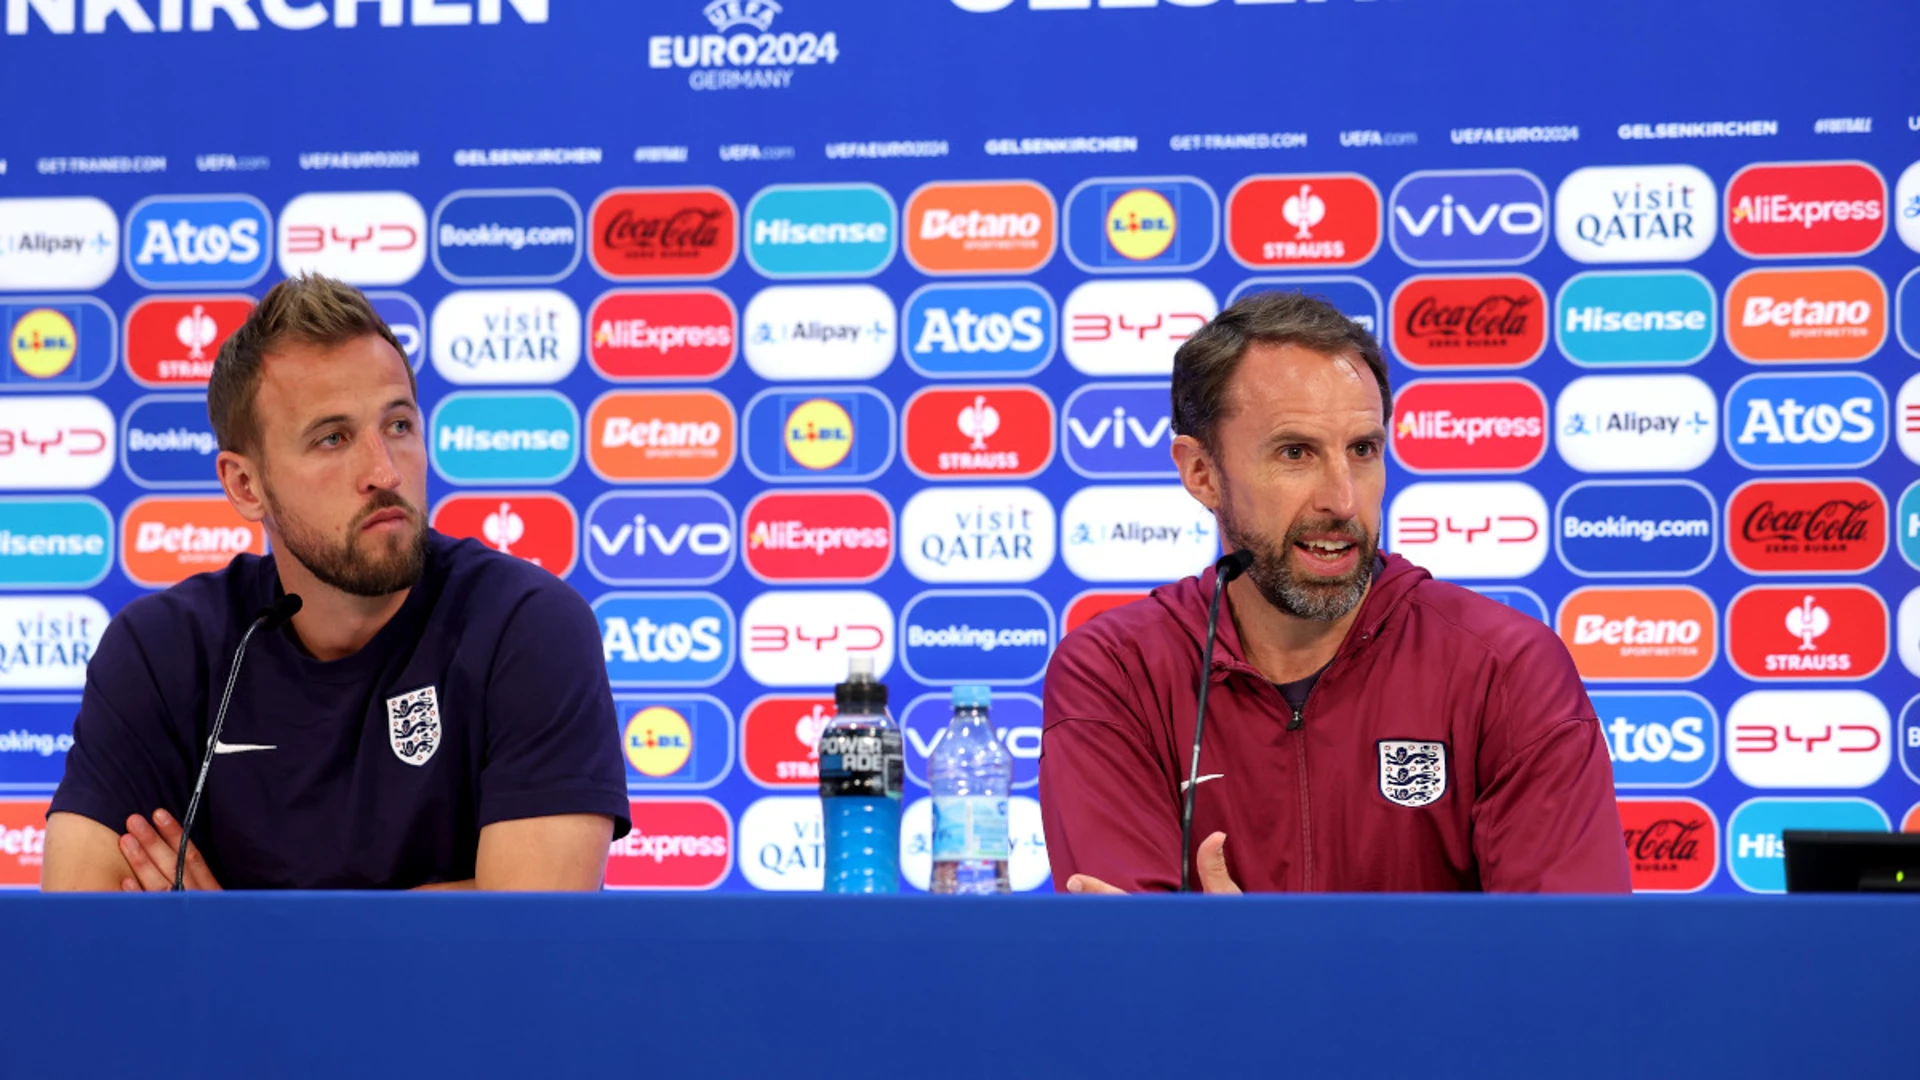 England ready to step up a gear in Euro 2024 knockouts, says Southgate